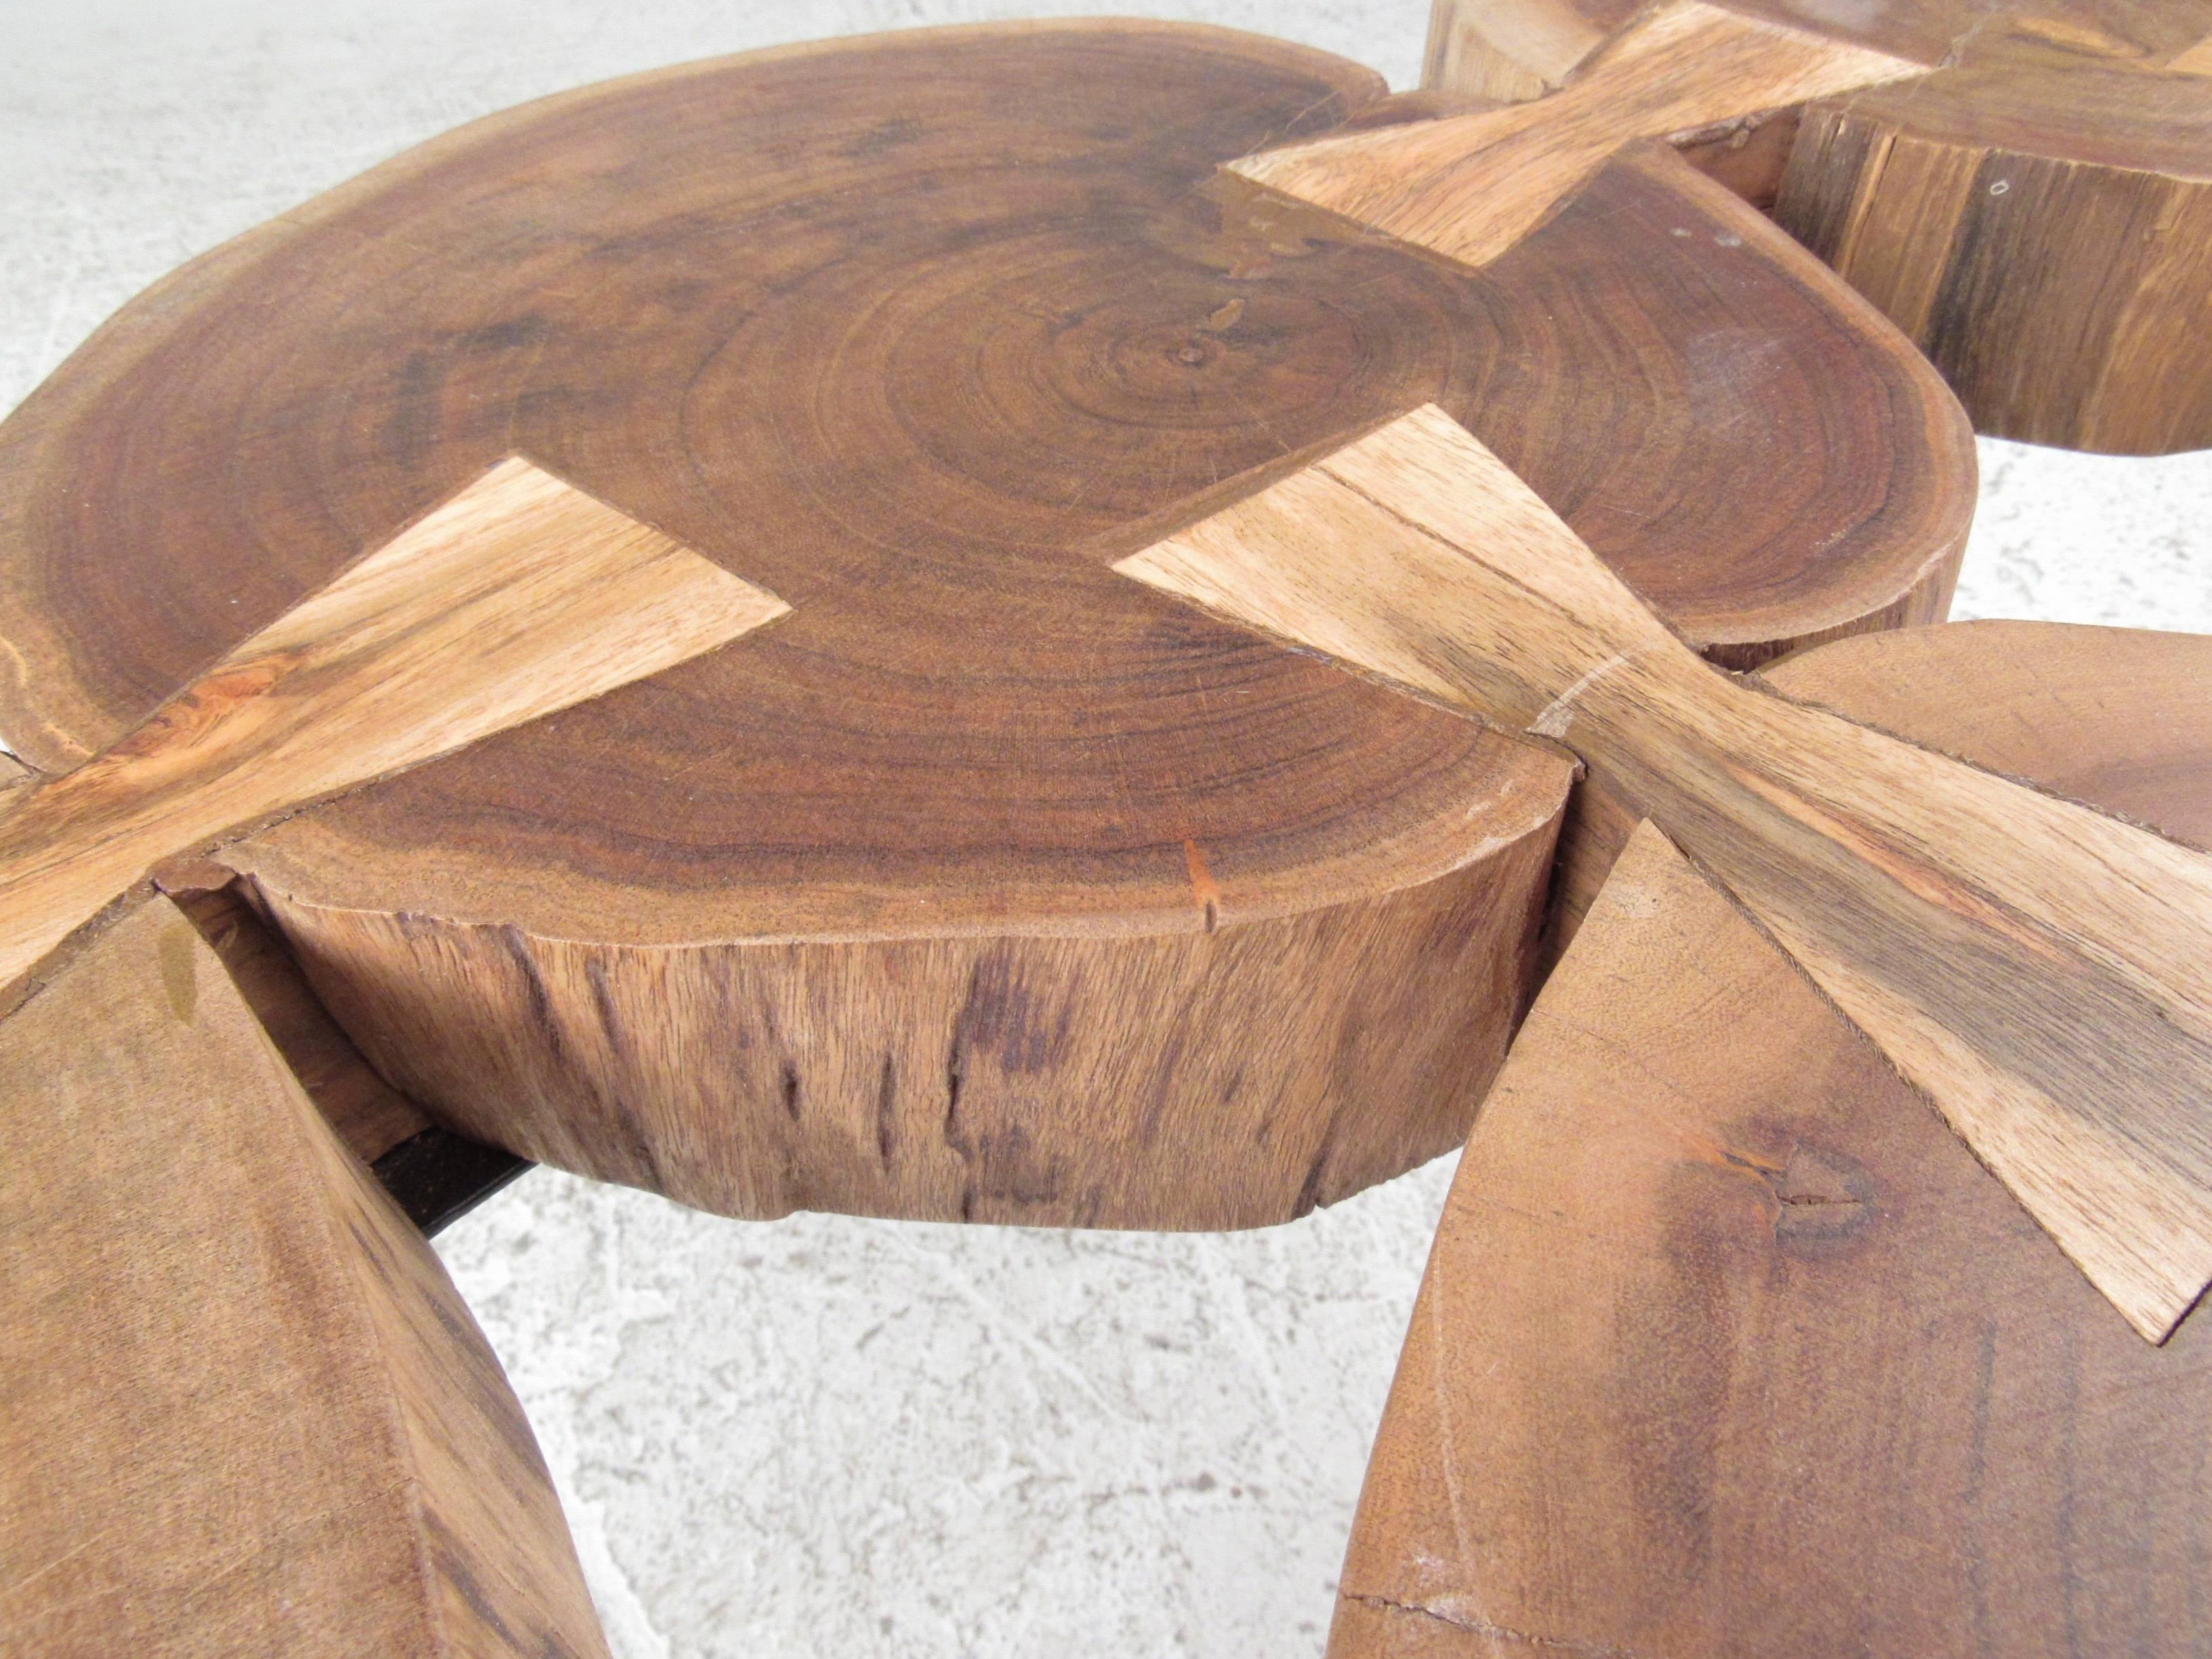 Coffee table with six tree stump circles joined by bow tie joints. Intron hair pin legs give a modern flair to the rustic top. A functional design that is sure to make a lasting impression in any home, business, or office.

(Please confirm item